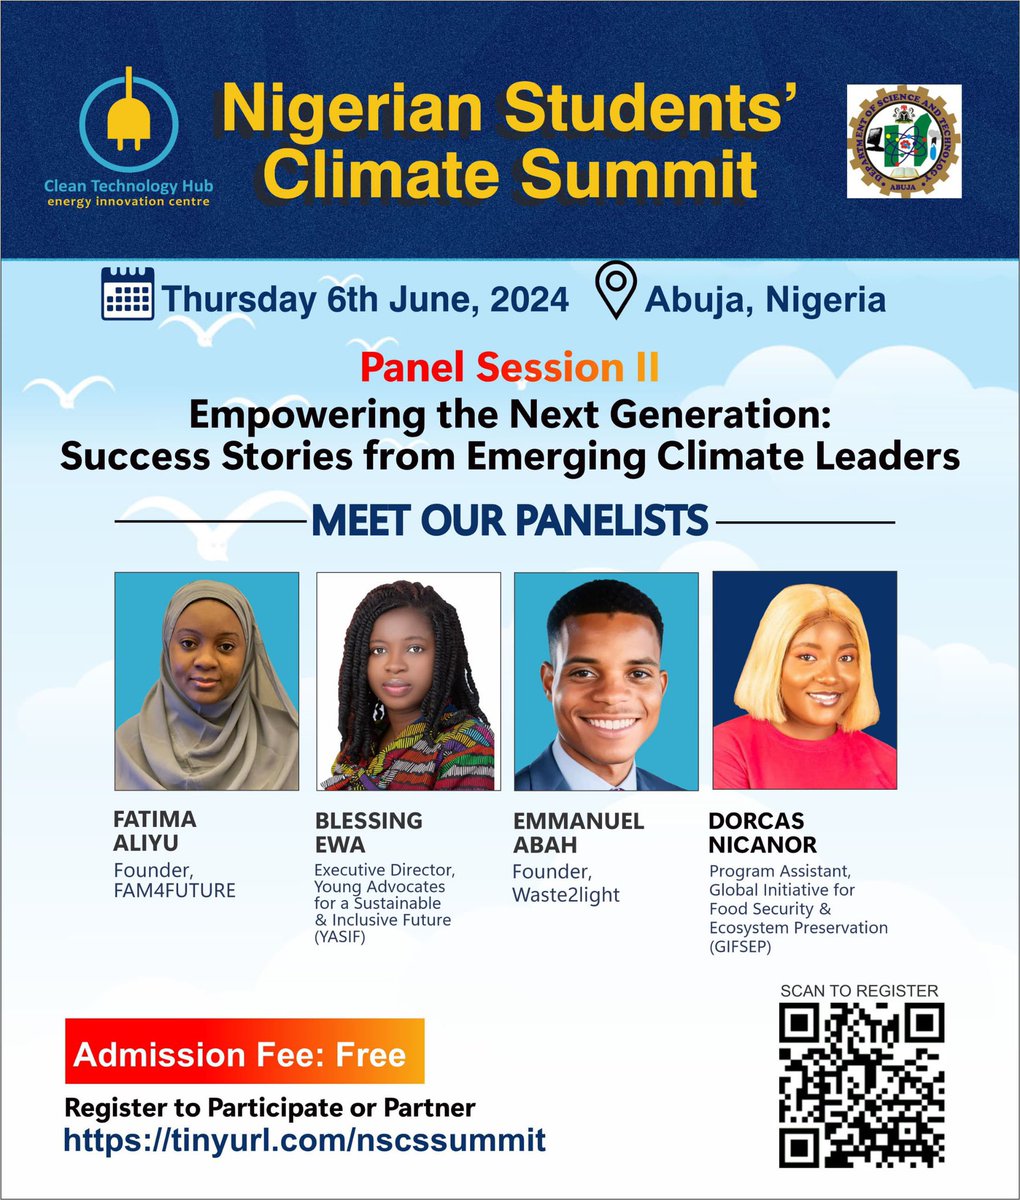 Meet our Panelists! The Nigerian Students Climate Summit is one of the largest youth convergence on climate change led by the youths in Nigeria. Mark your calendar for the upcoming event on June 6th, 2024 in Abuja. To participate or partner visit: tinyurl.com/nscssummit